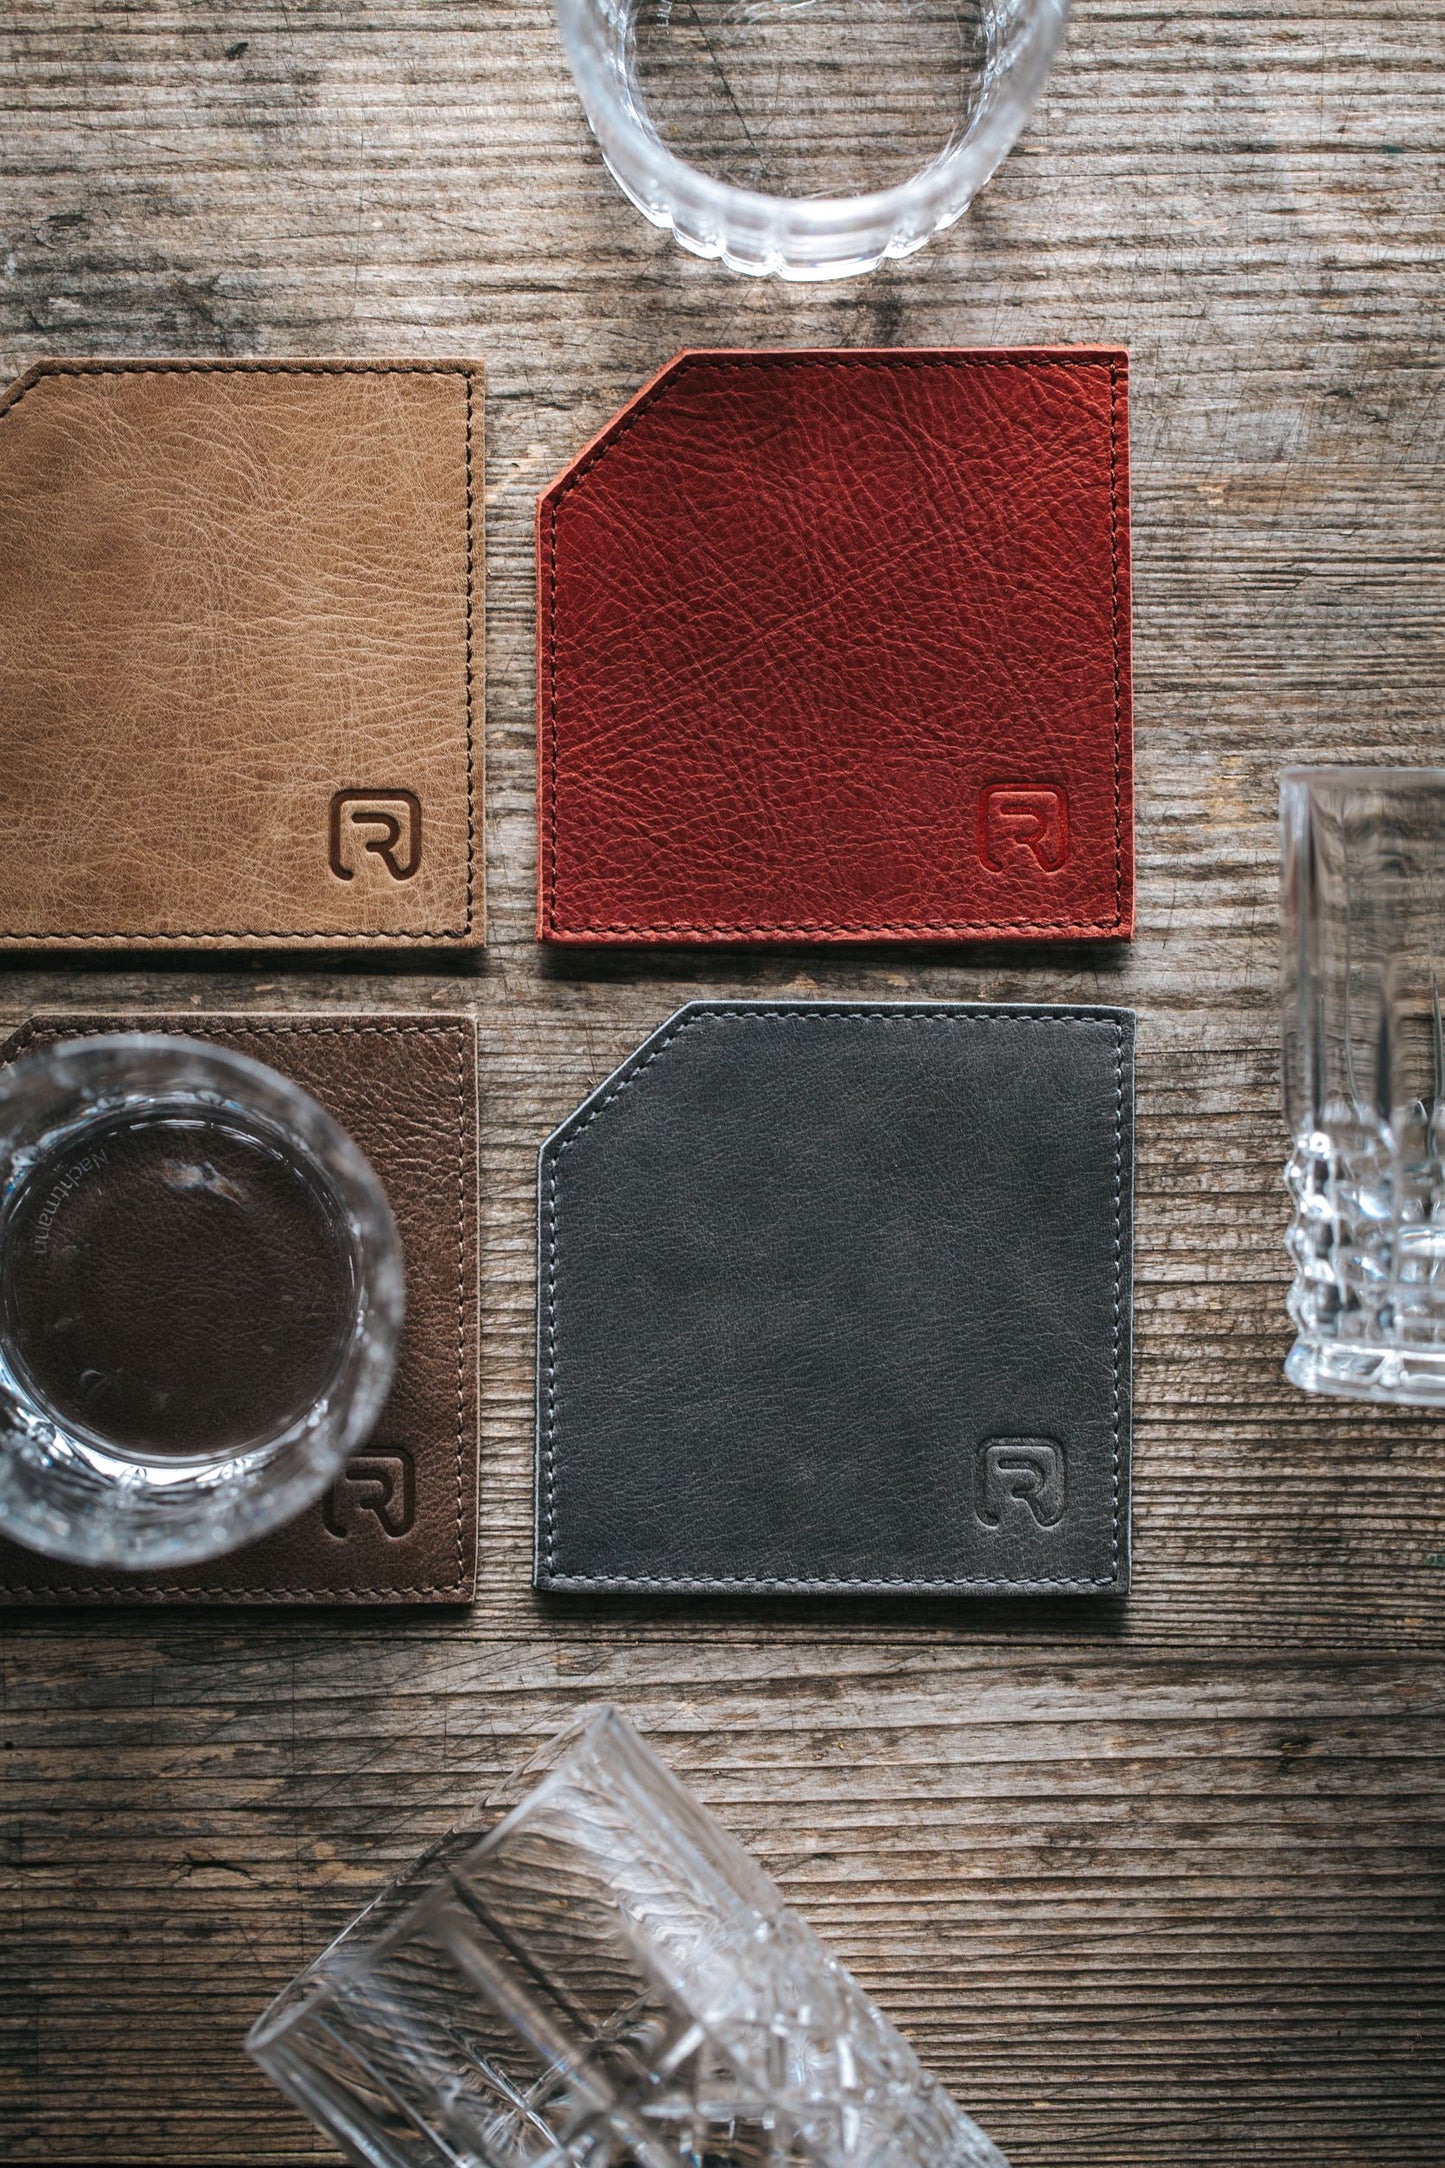 ROHLEDER Placemat & Coaster Sets - Elevate Your Dining Experience